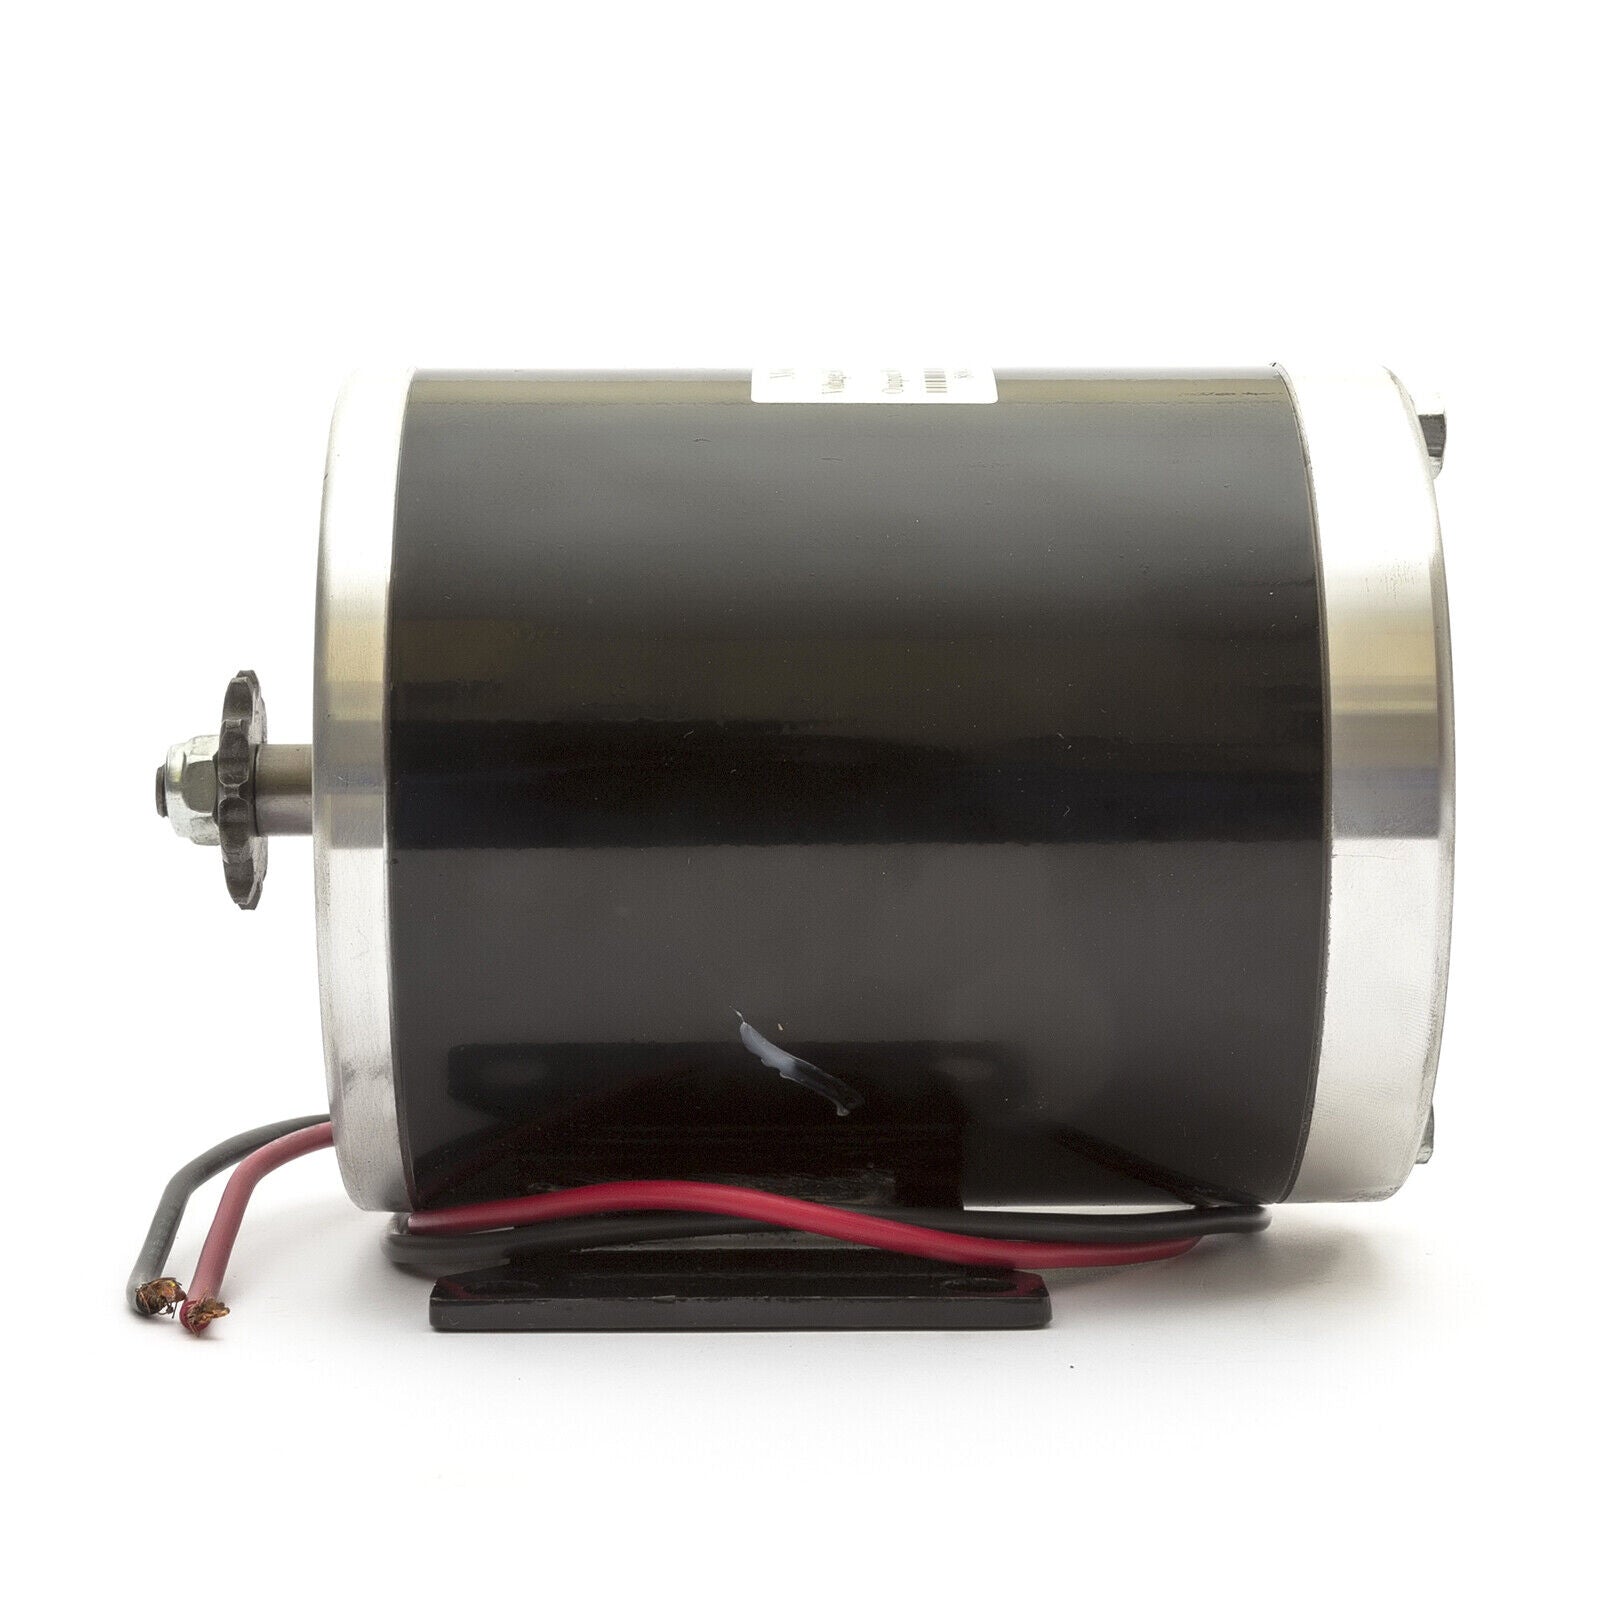 Load image into Gallery viewer, 36v 1000w Motor Fits Renegade And Other 1000w Electric Quad Bikes
